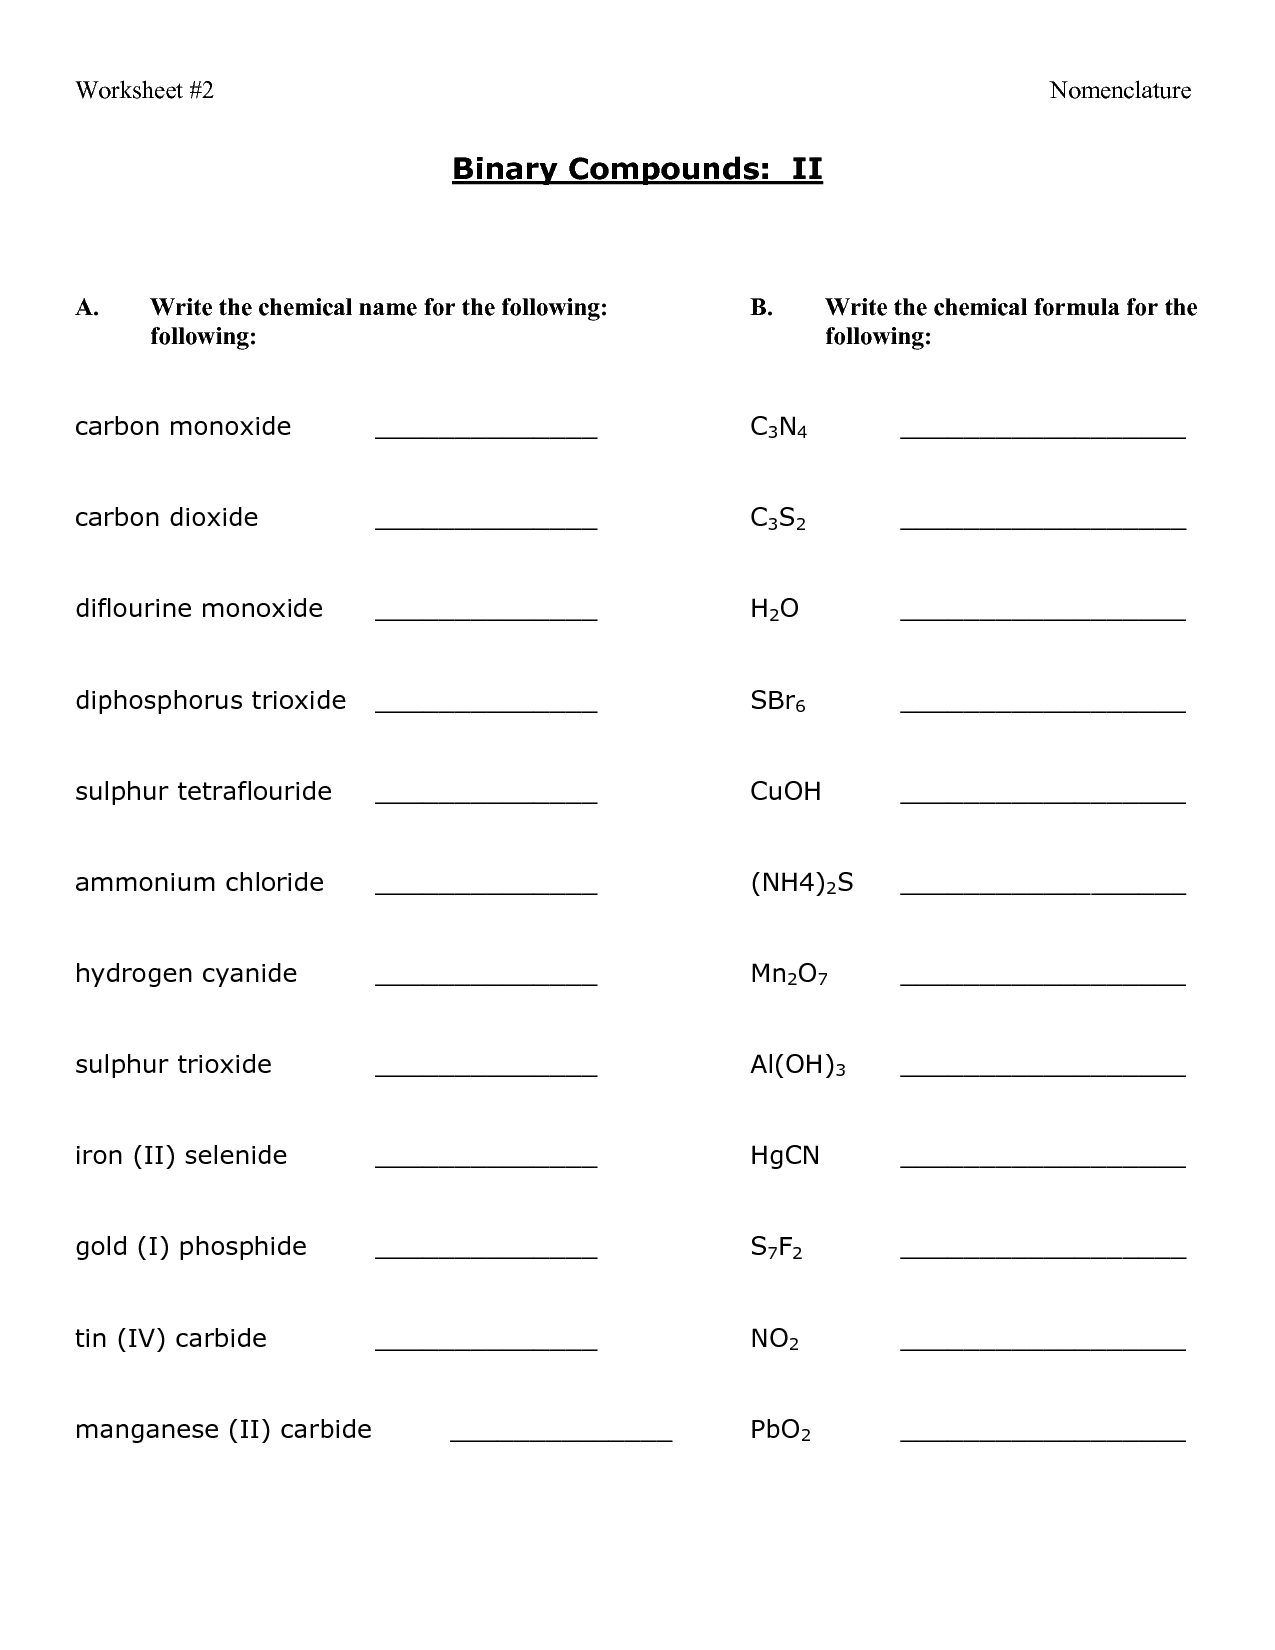 12-best-images-of-binary-ionic-compounds-worksheet-answers-writing-ionic-compound-formula